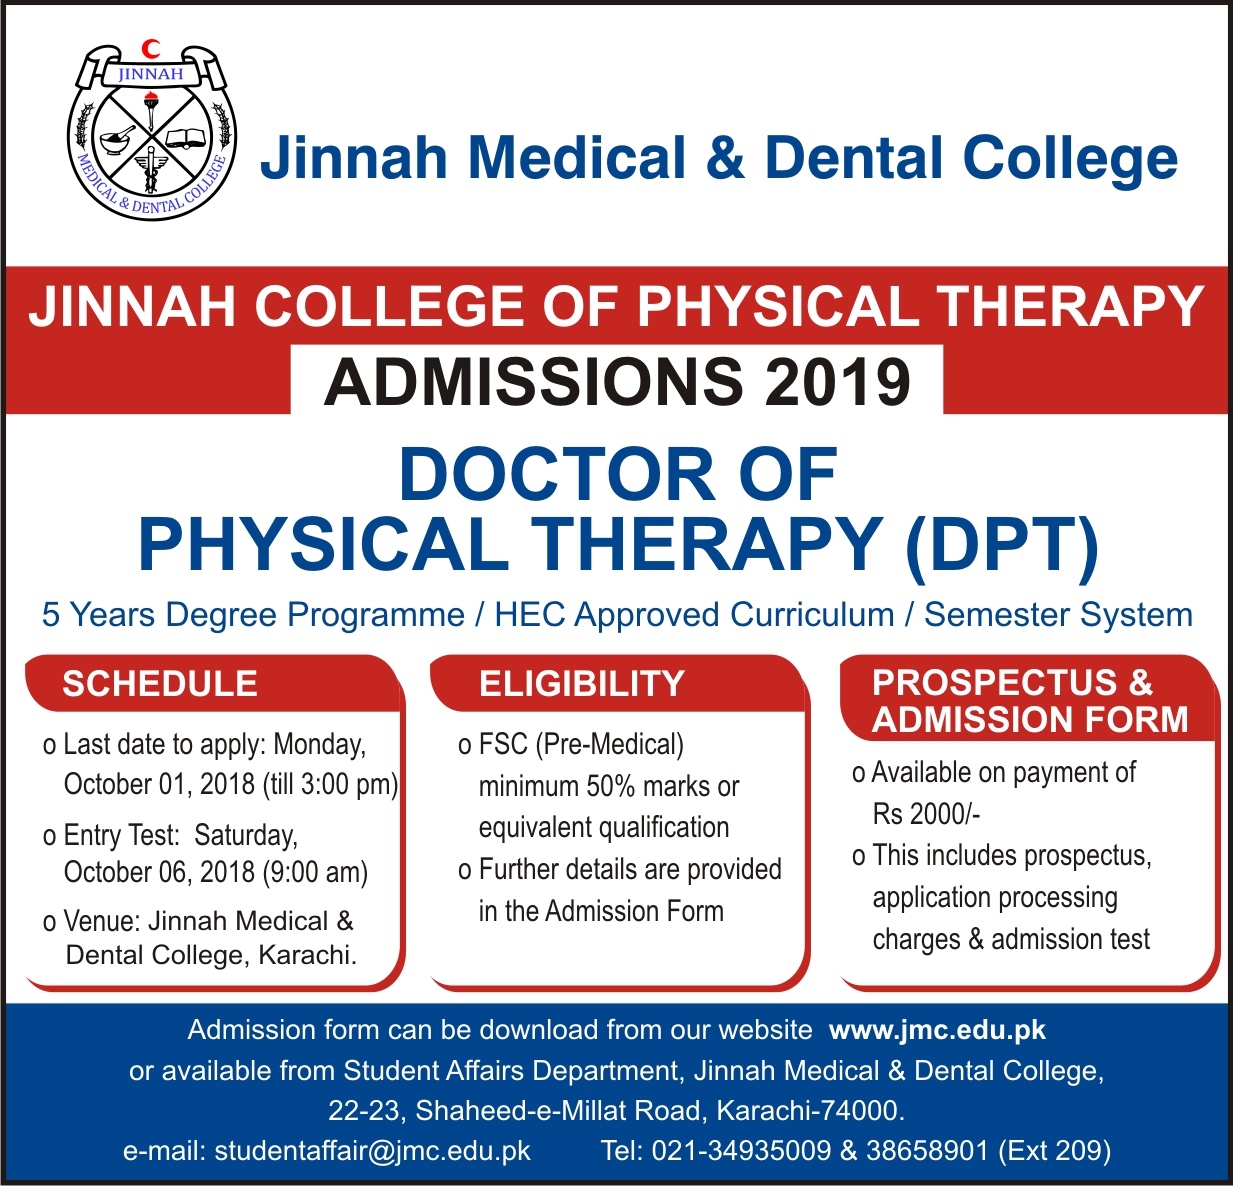 Jinnah College of Physical Therapy DPT Admissions 2019